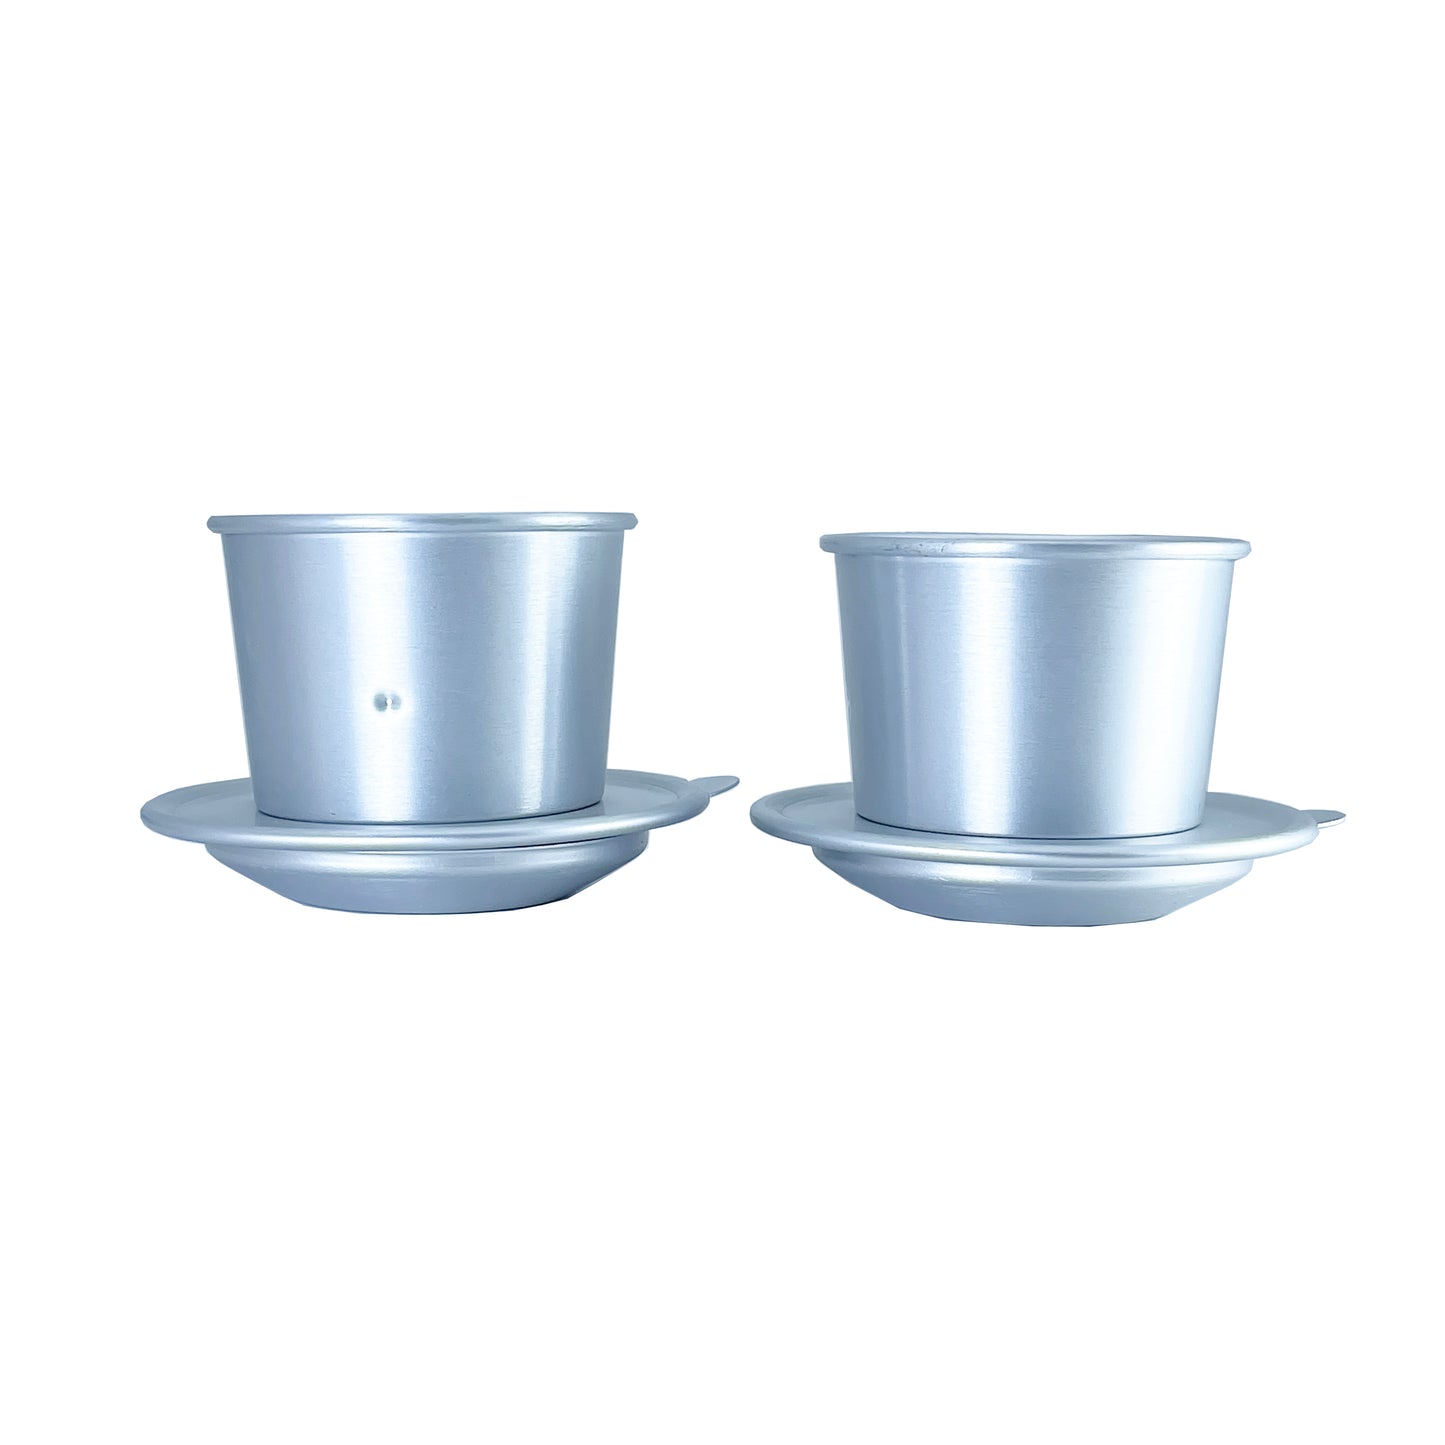 2 sets of vietnamese coffee drip made by aluminum